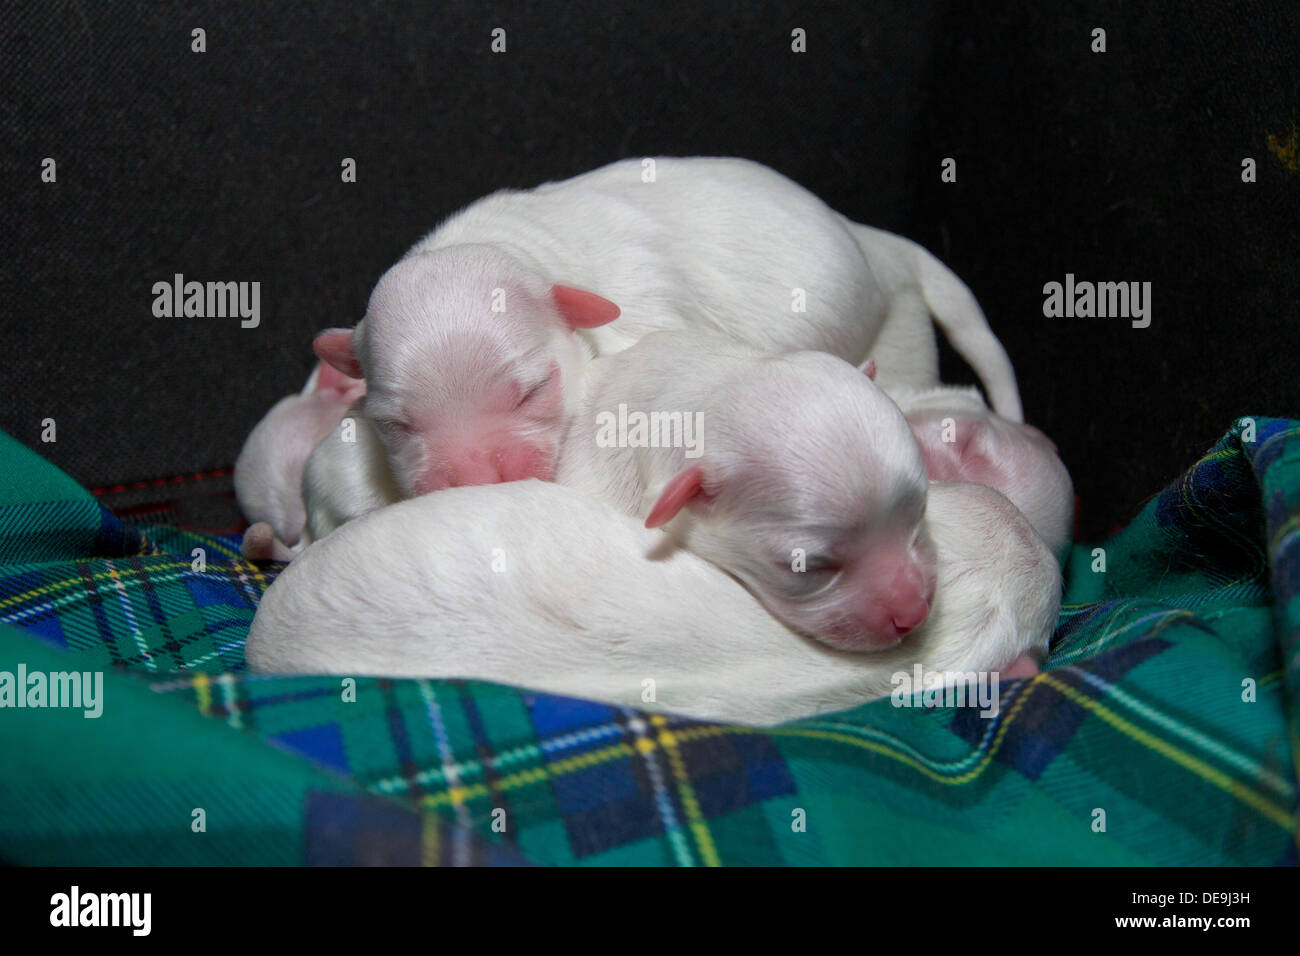 Cute lost Maltese puppy puppies, dog curled up in bed on blanket tartan Stock Photo